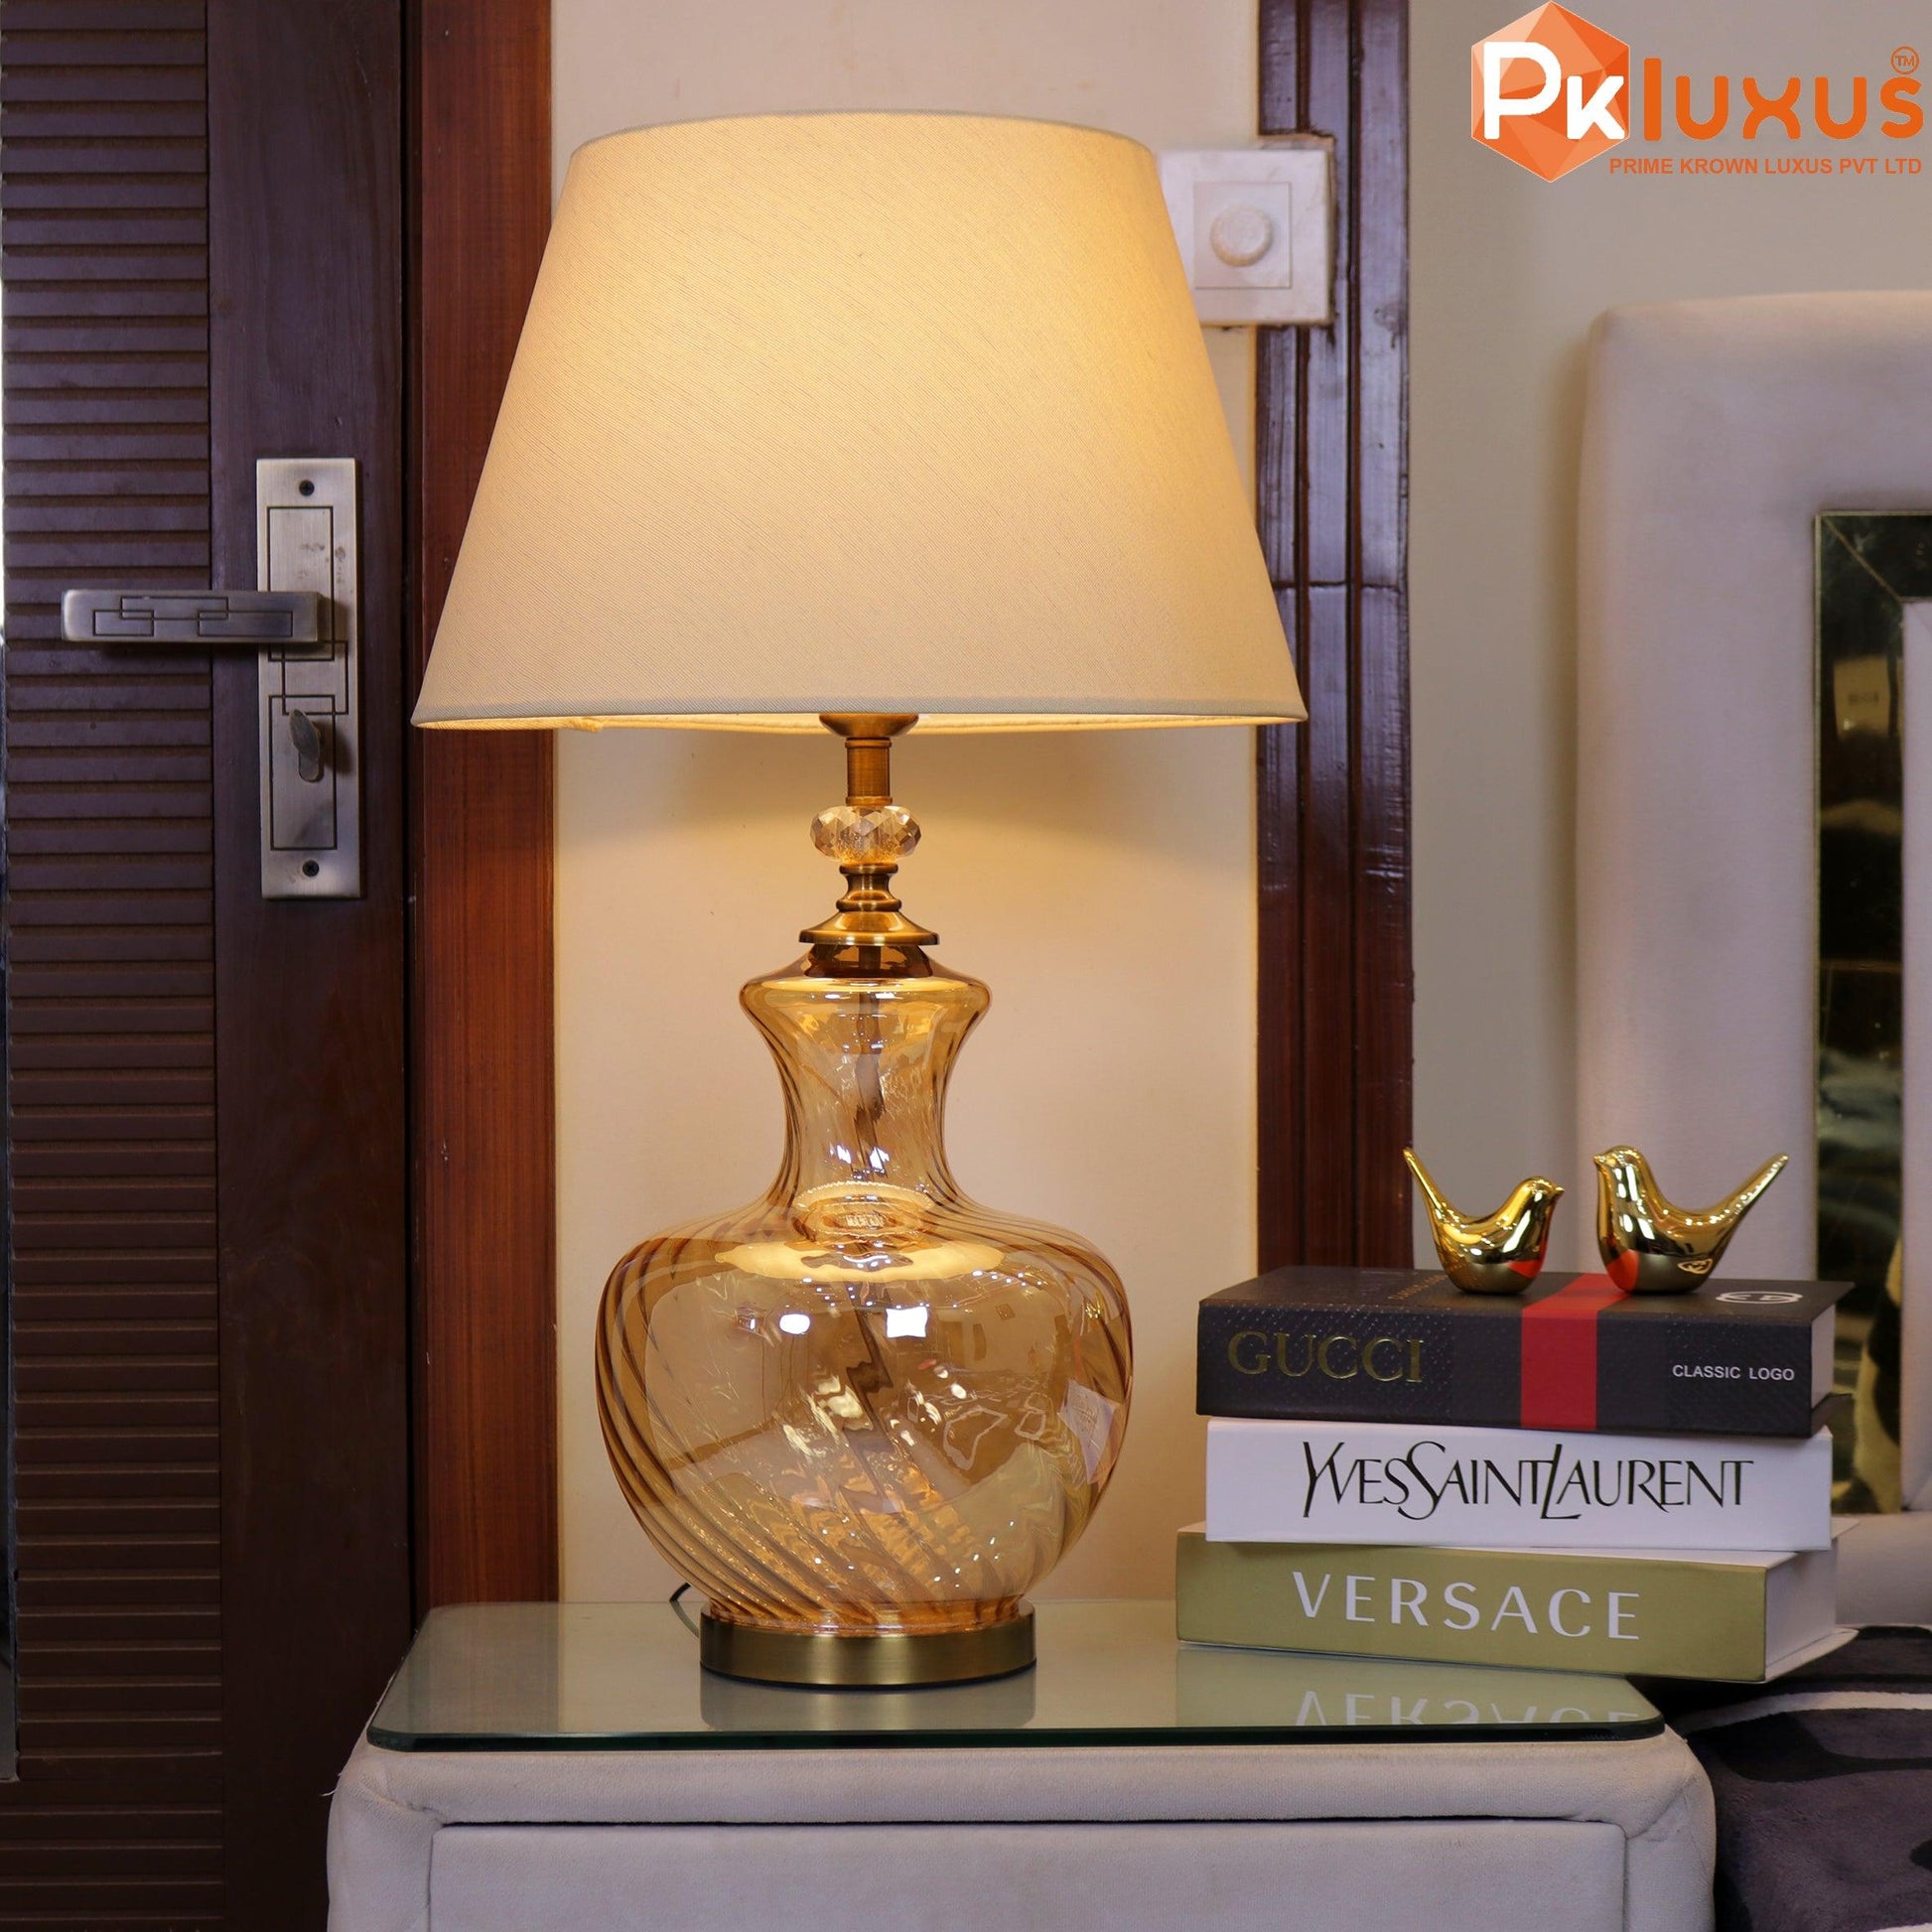 Luxury Gold Big Clay Pot Style Lamp With Light Golden Shade | PK LUXUS™ - PK LUXUS